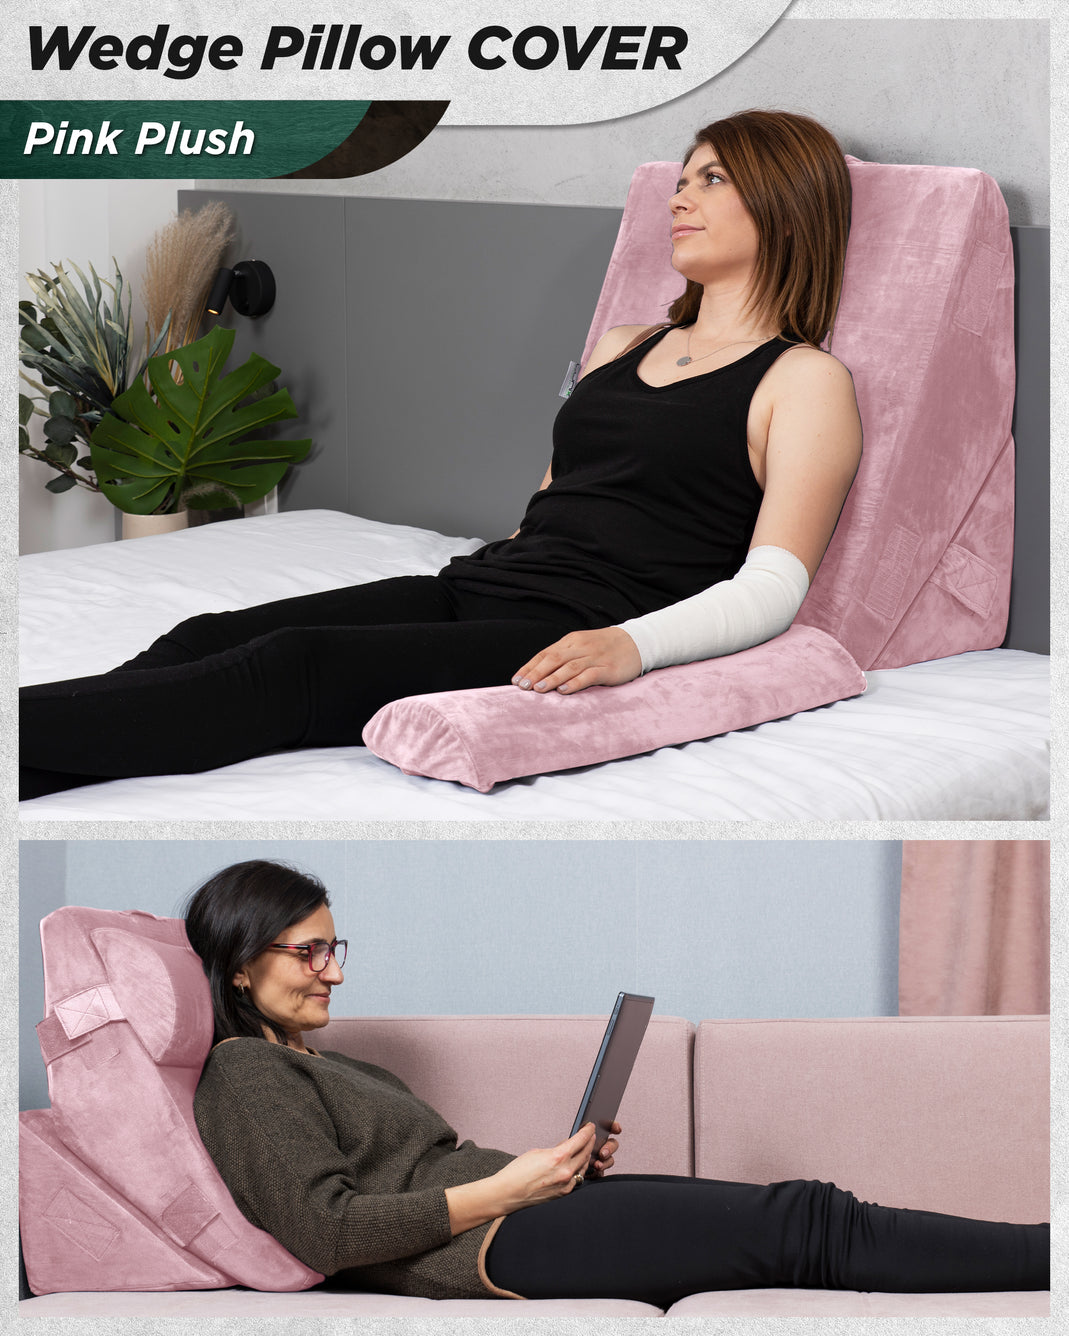 Lunix 3pcs Wedge Pillow Cover Set Only for LX6, Pink Plush, Pillows and Foam not Included